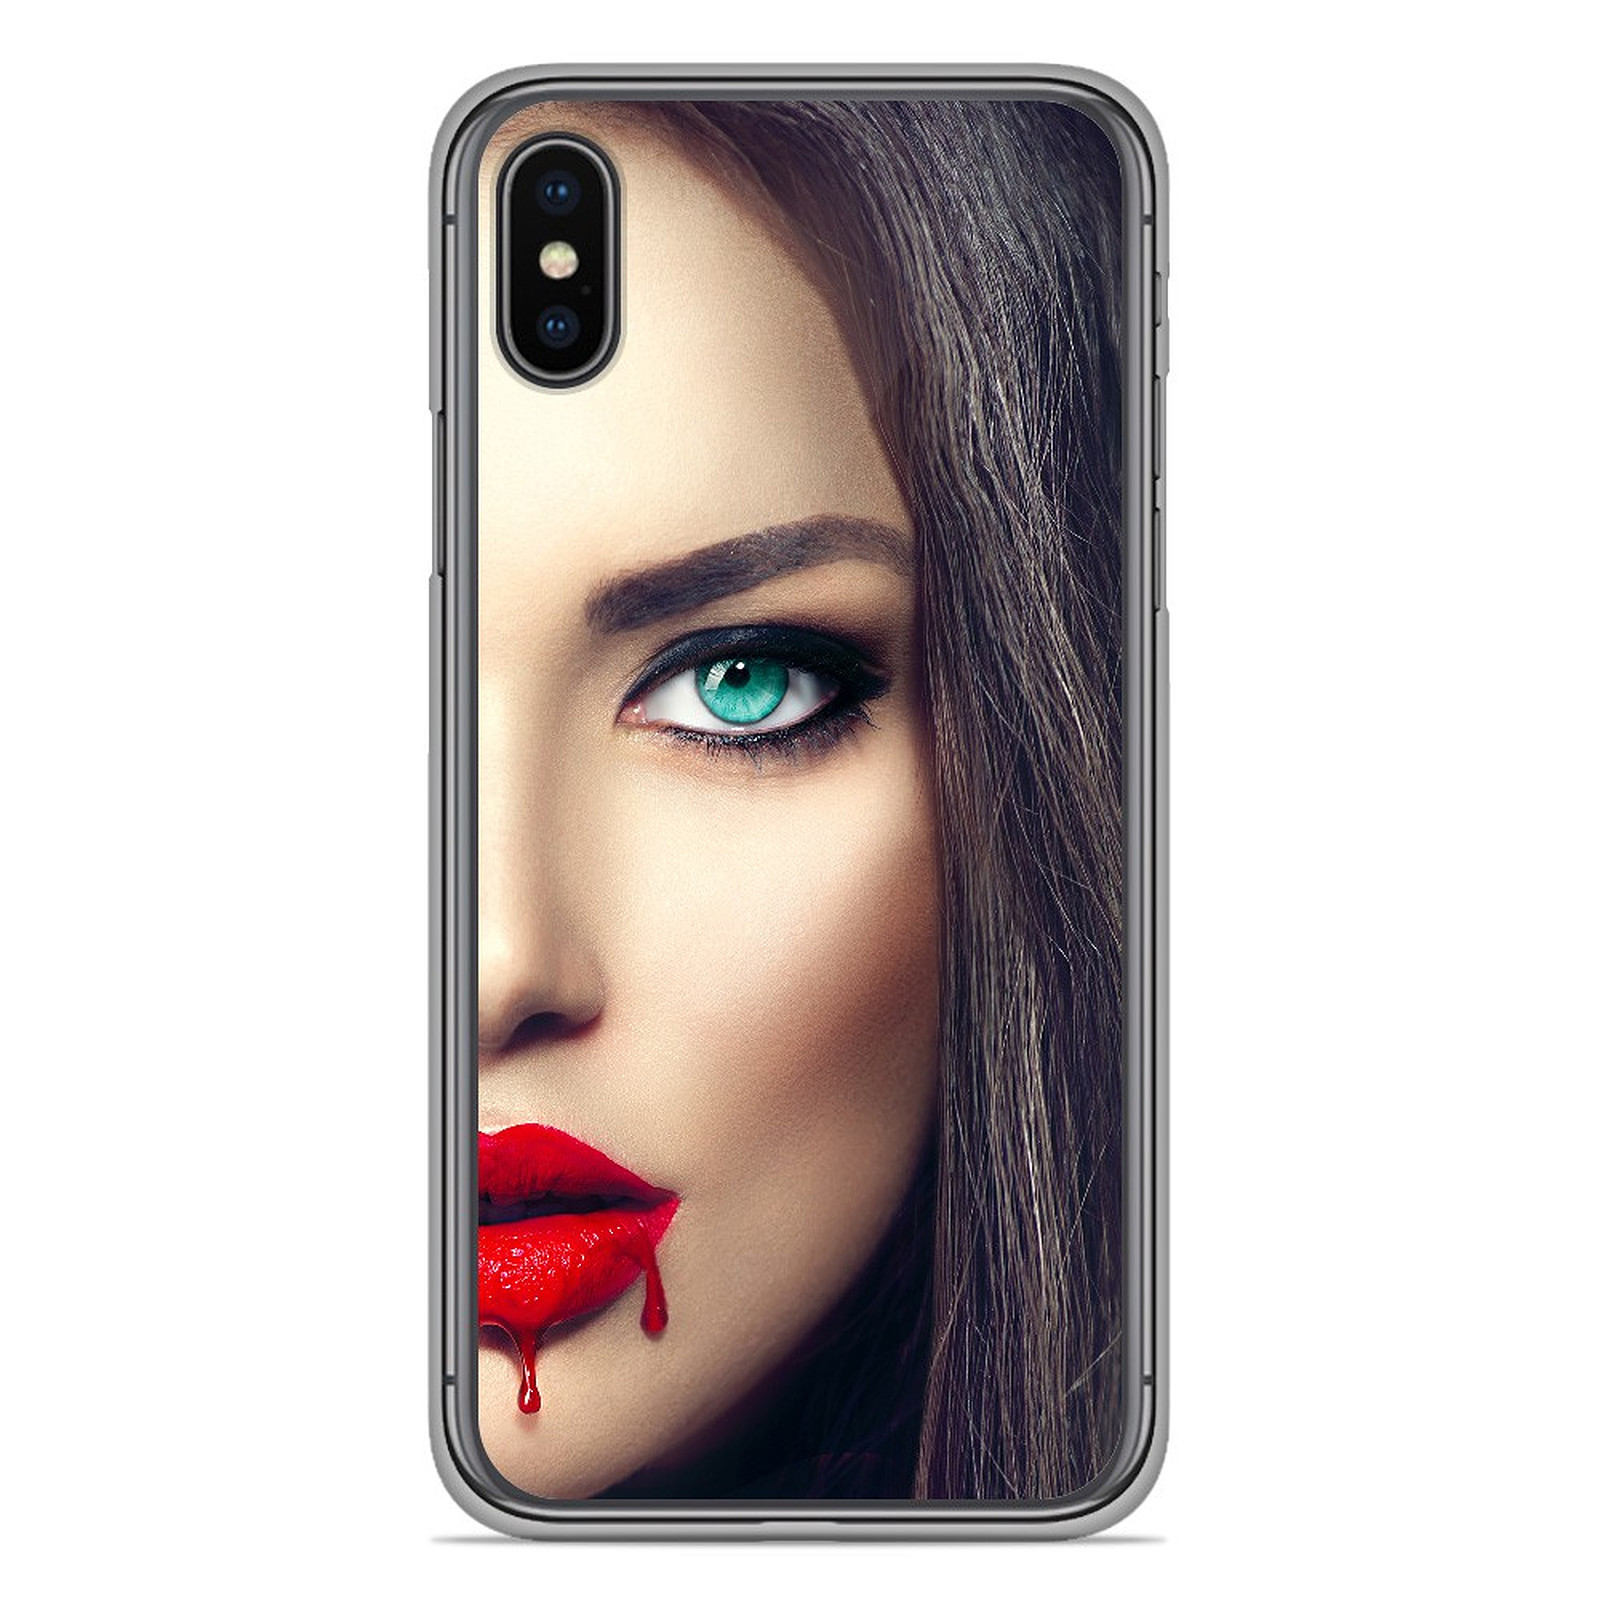 1001 Coques Coque silicone gel Apple iPhone X motif Lèvres Sang - Coque telephone 1001Coques